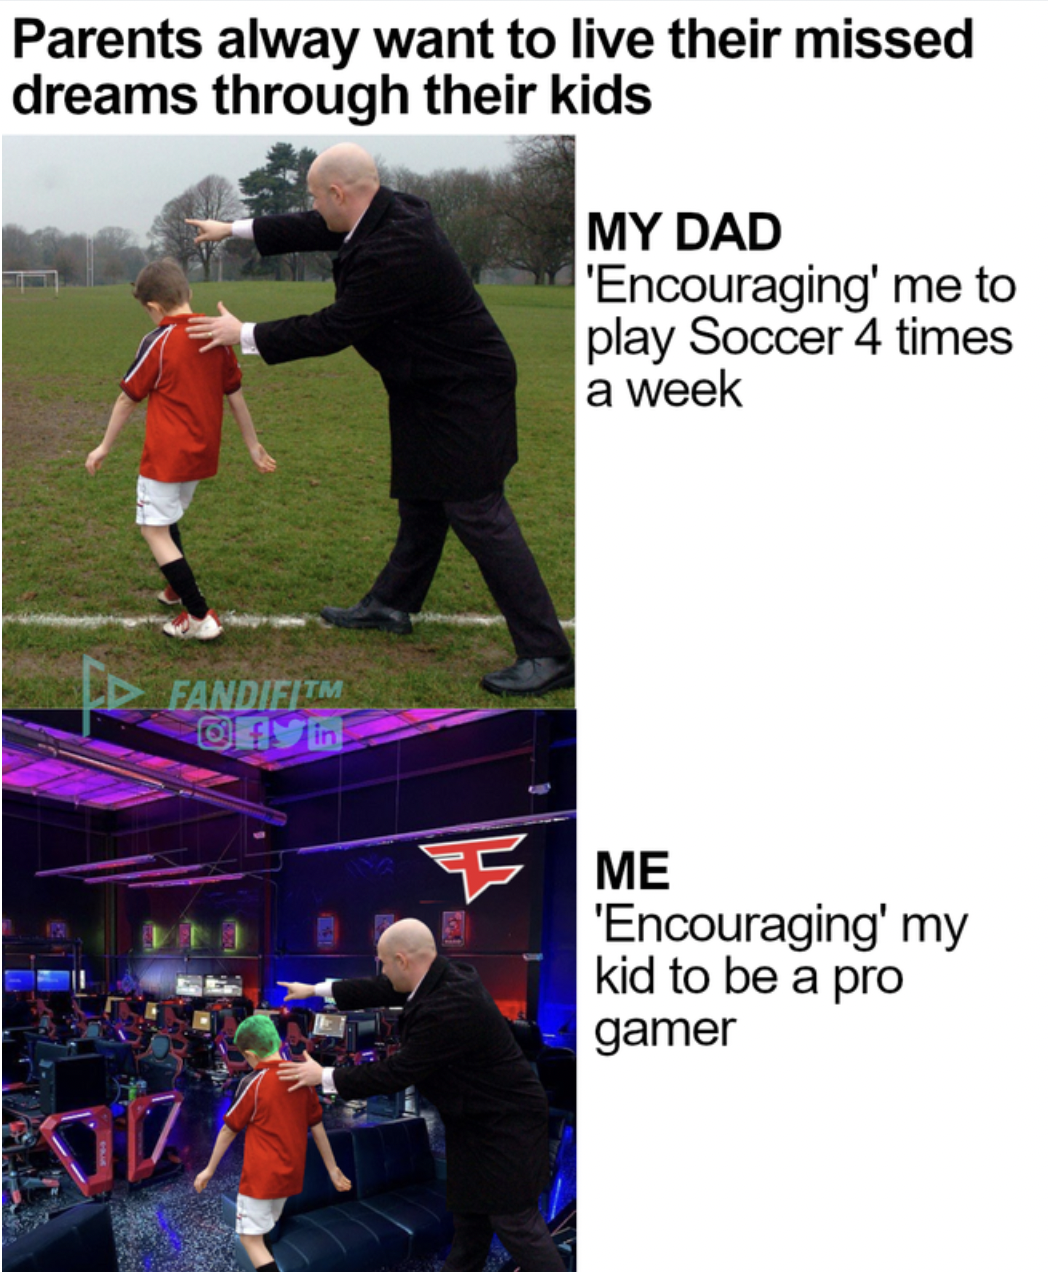 Gaming memes - pushy parents in sport - Parents alway want to live their missed dreams through their kids Fandifitm My Dad 'Encouraging' me to play Soccer 4 times a week Me 'Encouraging' my kid to be a pro gamer